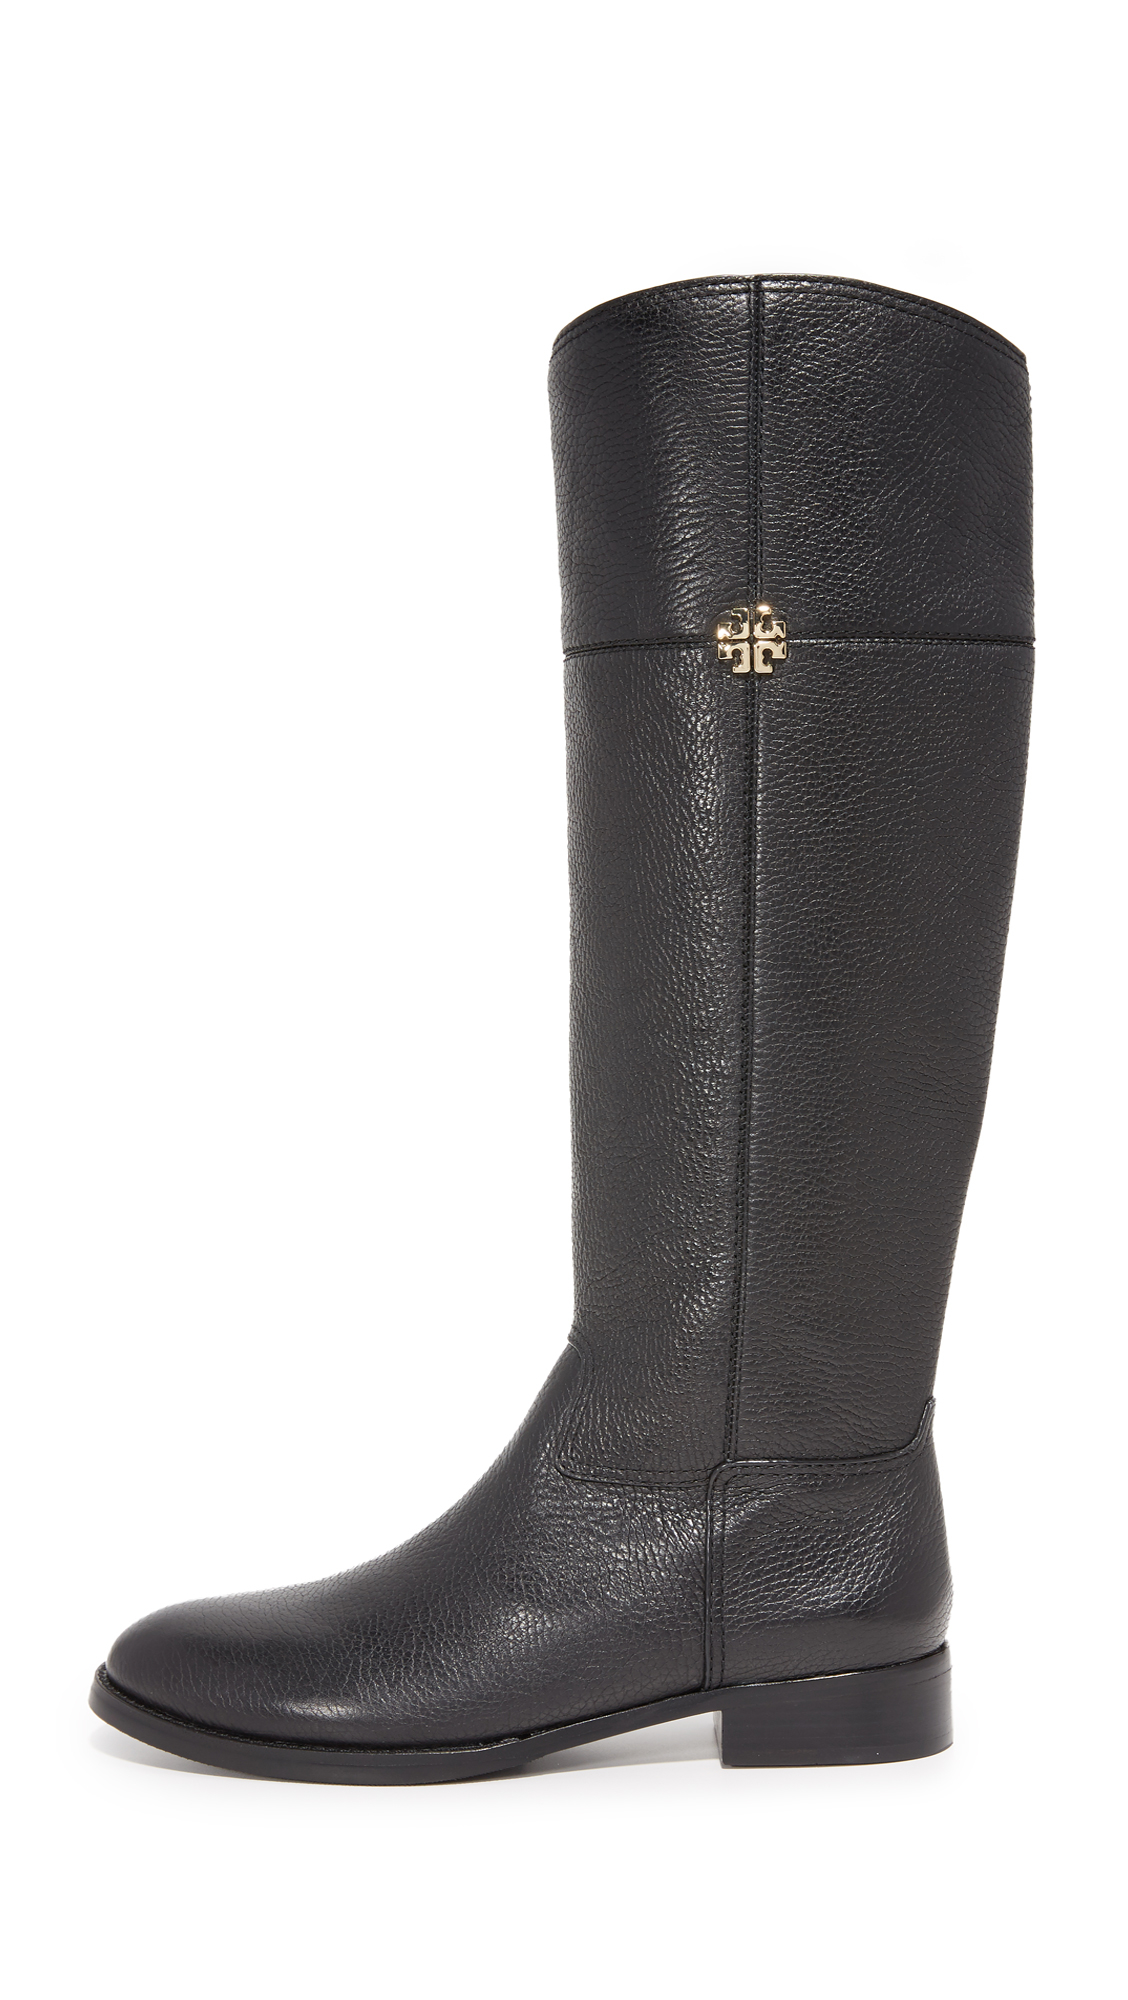 Tory burch Jolie Leather Riding Boot in Black | Lyst